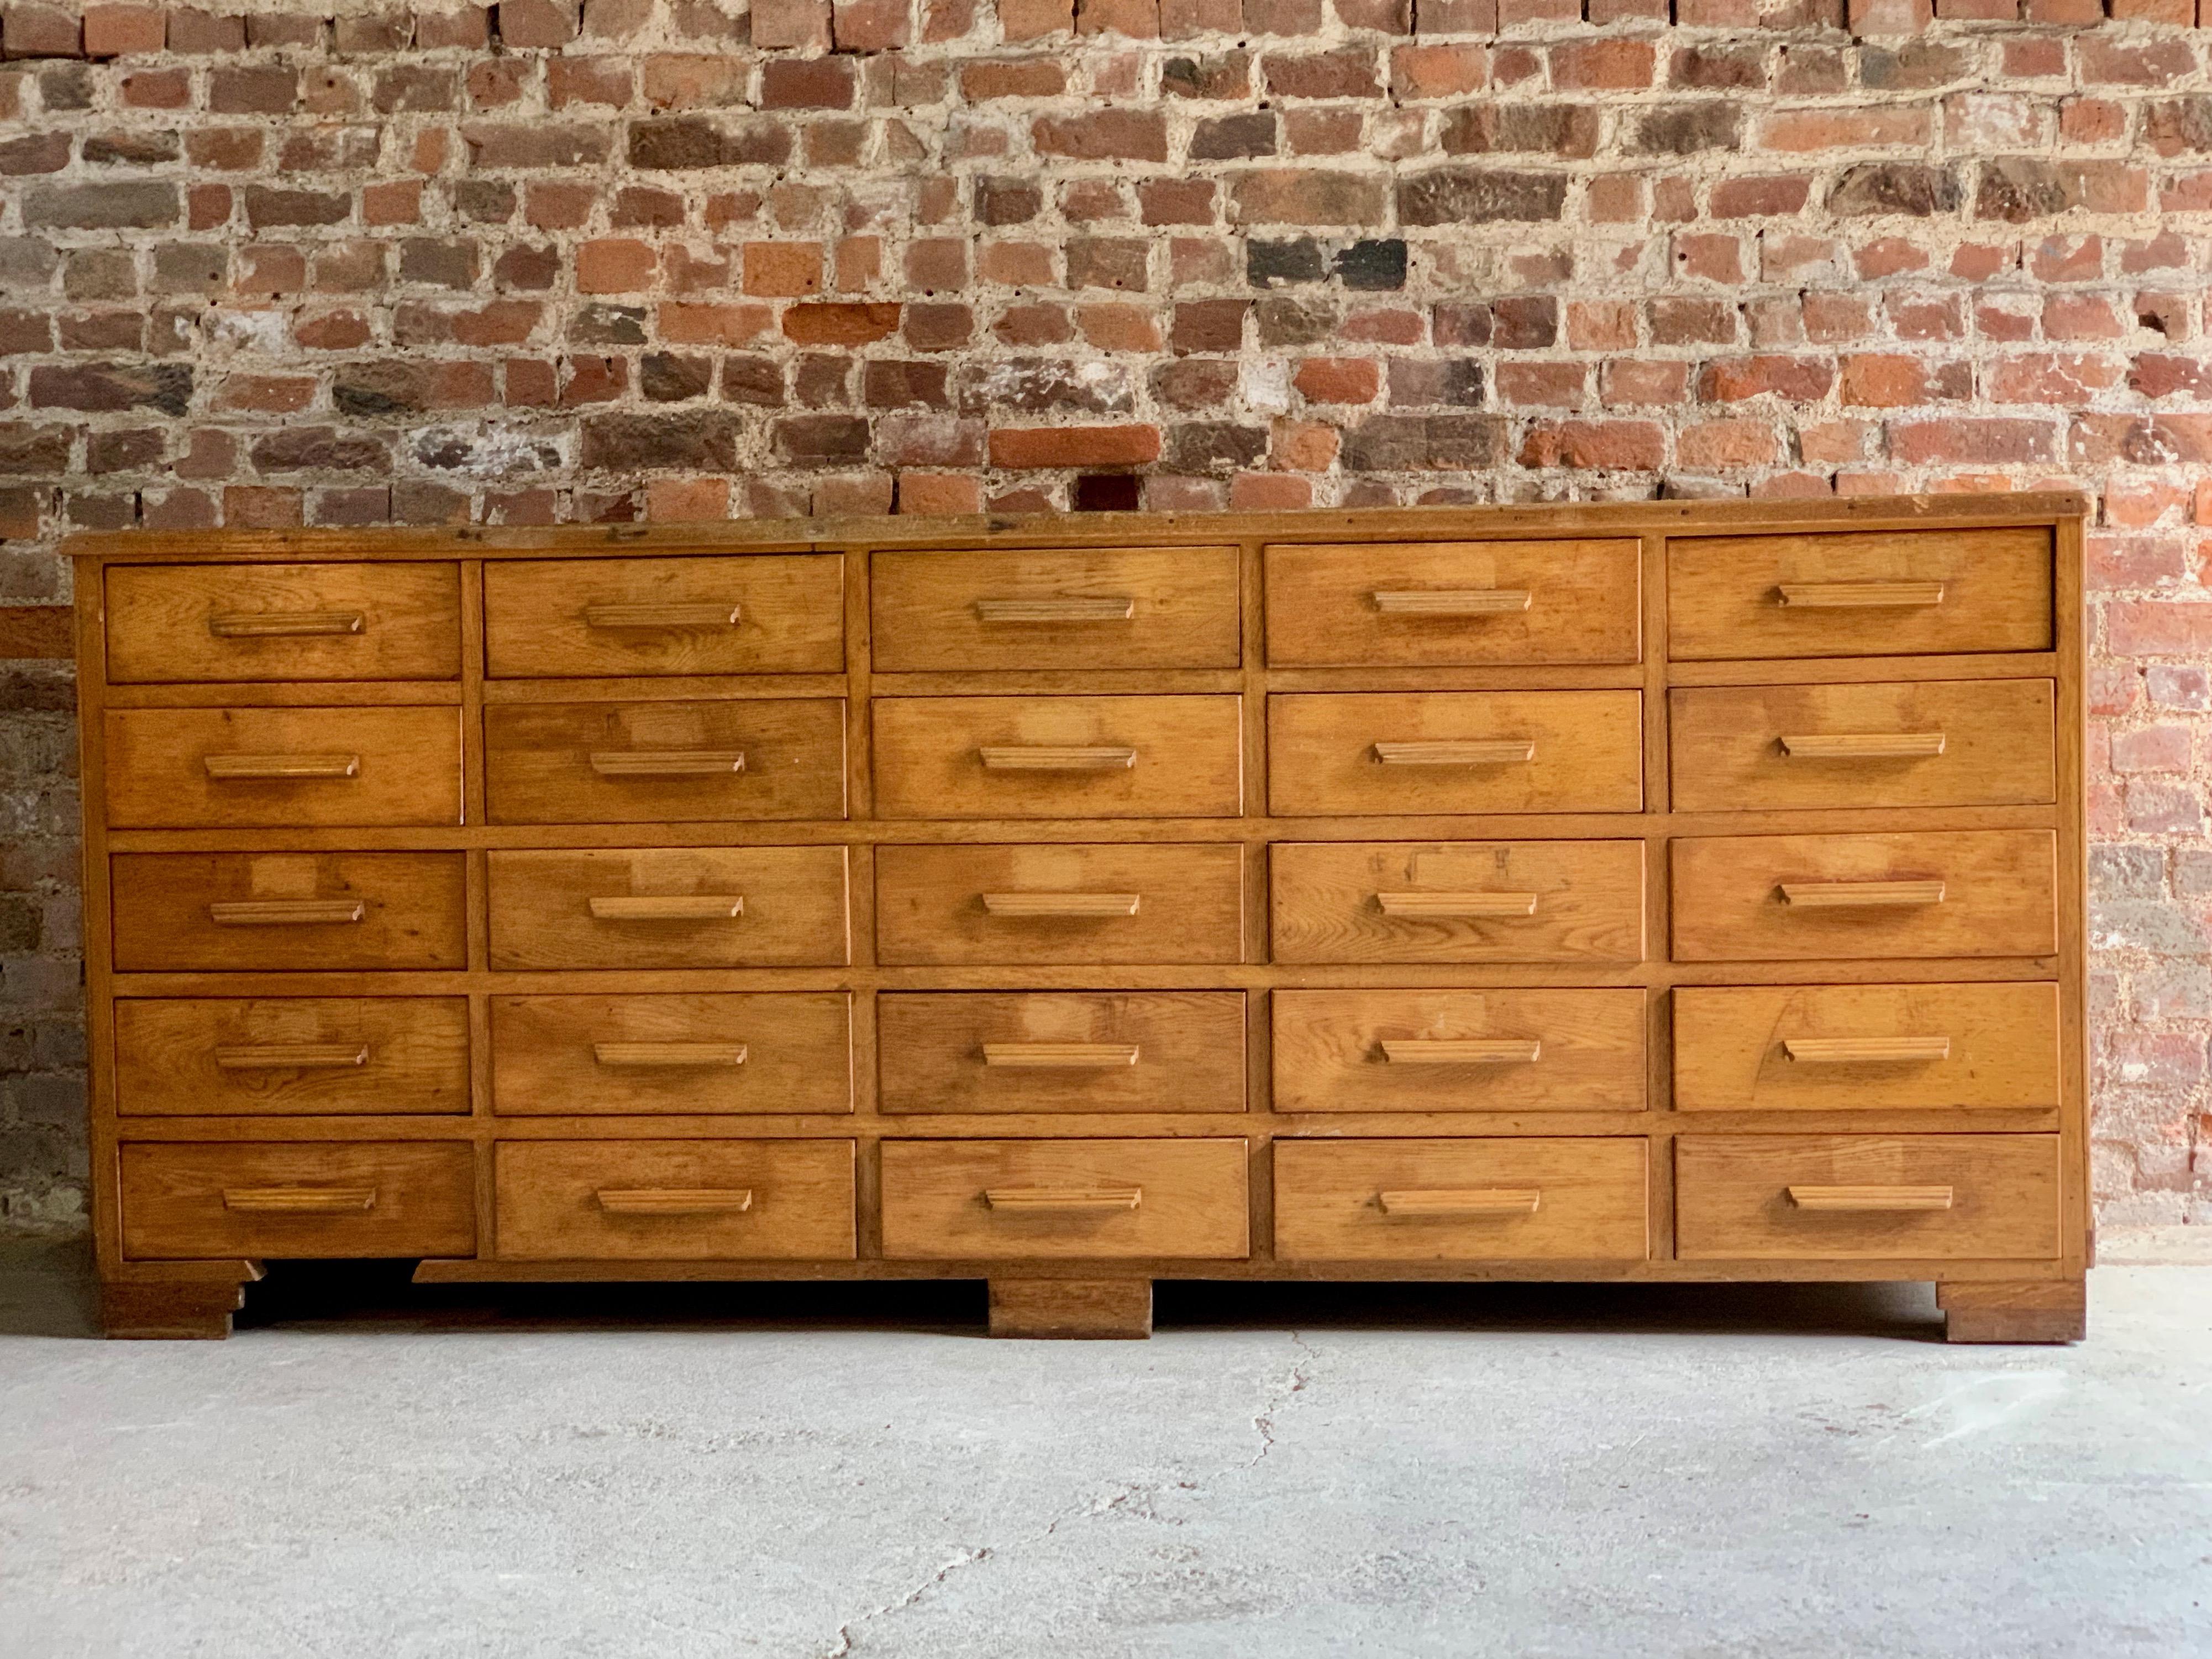 Midcentury large haberdashery oak shop counter 25 drawers 1940s.

A fabulous early 20th century extremely large Haberdashery oak shop counter/sideboard, the rectangular top over 25 well-proportioned and uniformed pull out drawers.

Ideal for the